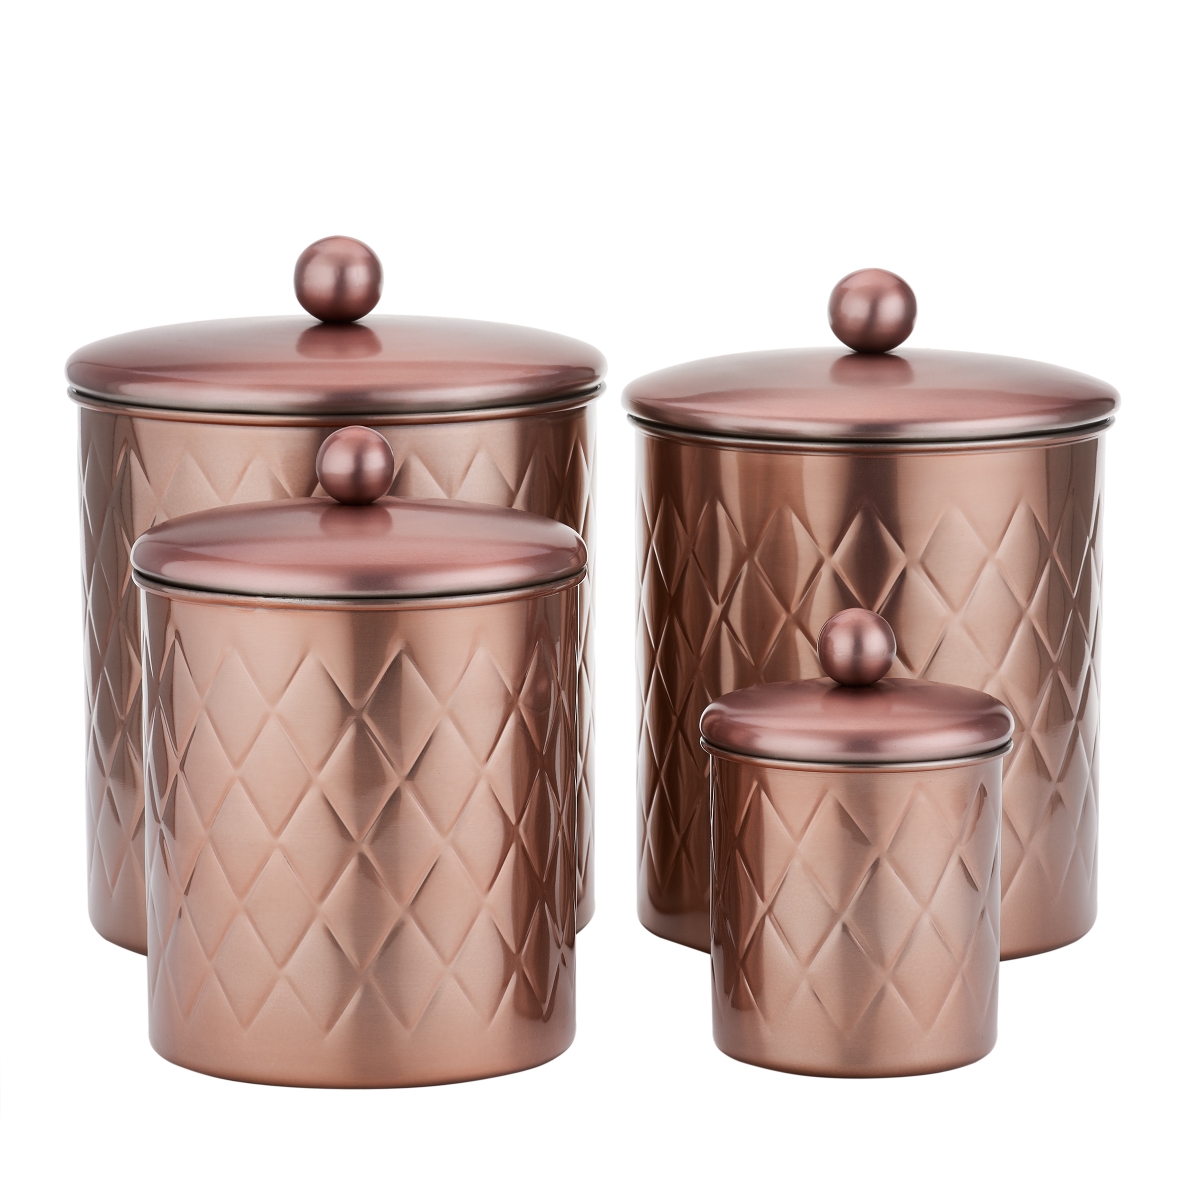 1863rg 1.75-4.75 Qt. Embossed Diamond Canister Set, Rose Gold - 4 Piece